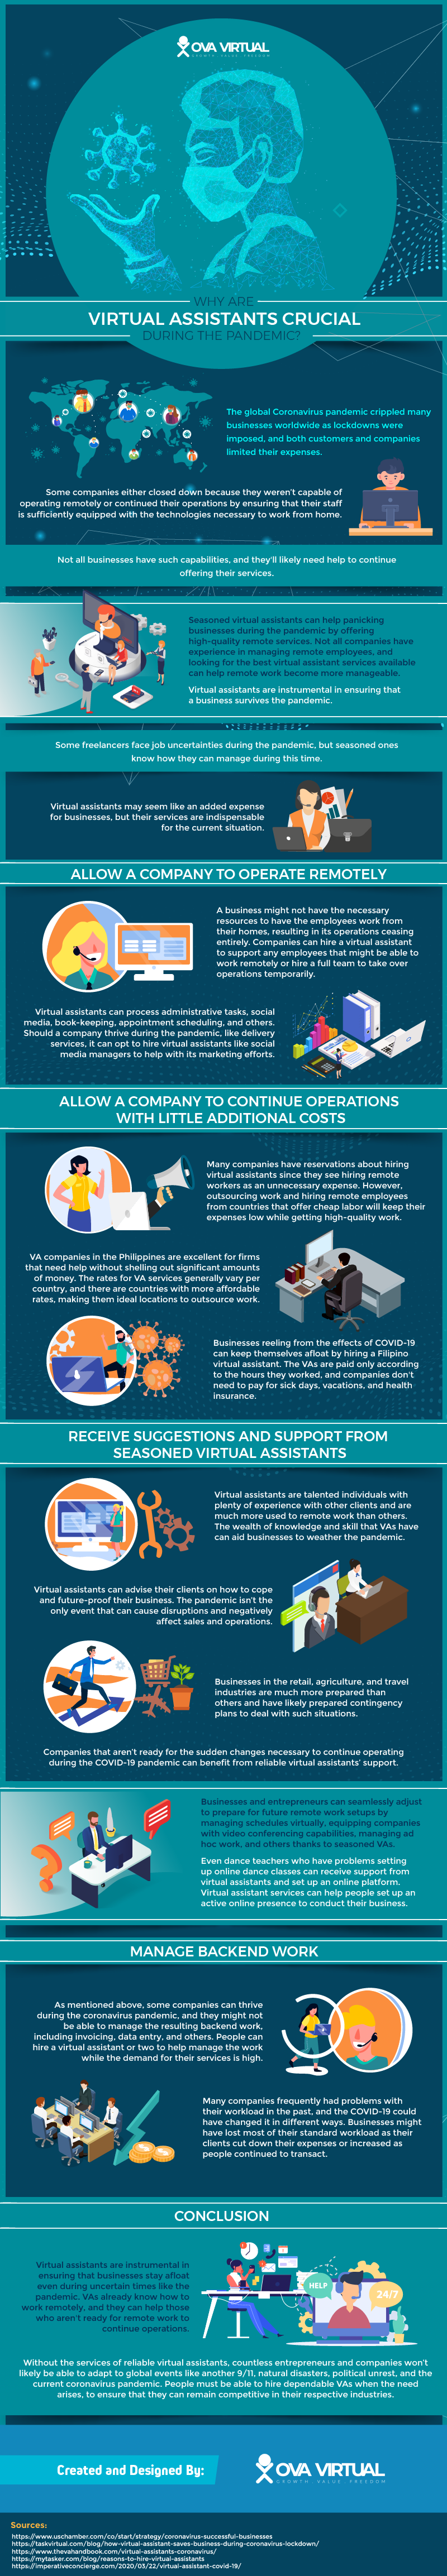 Why Are Virtual Assistants Crucial During the Pandemic? (Infographic ...